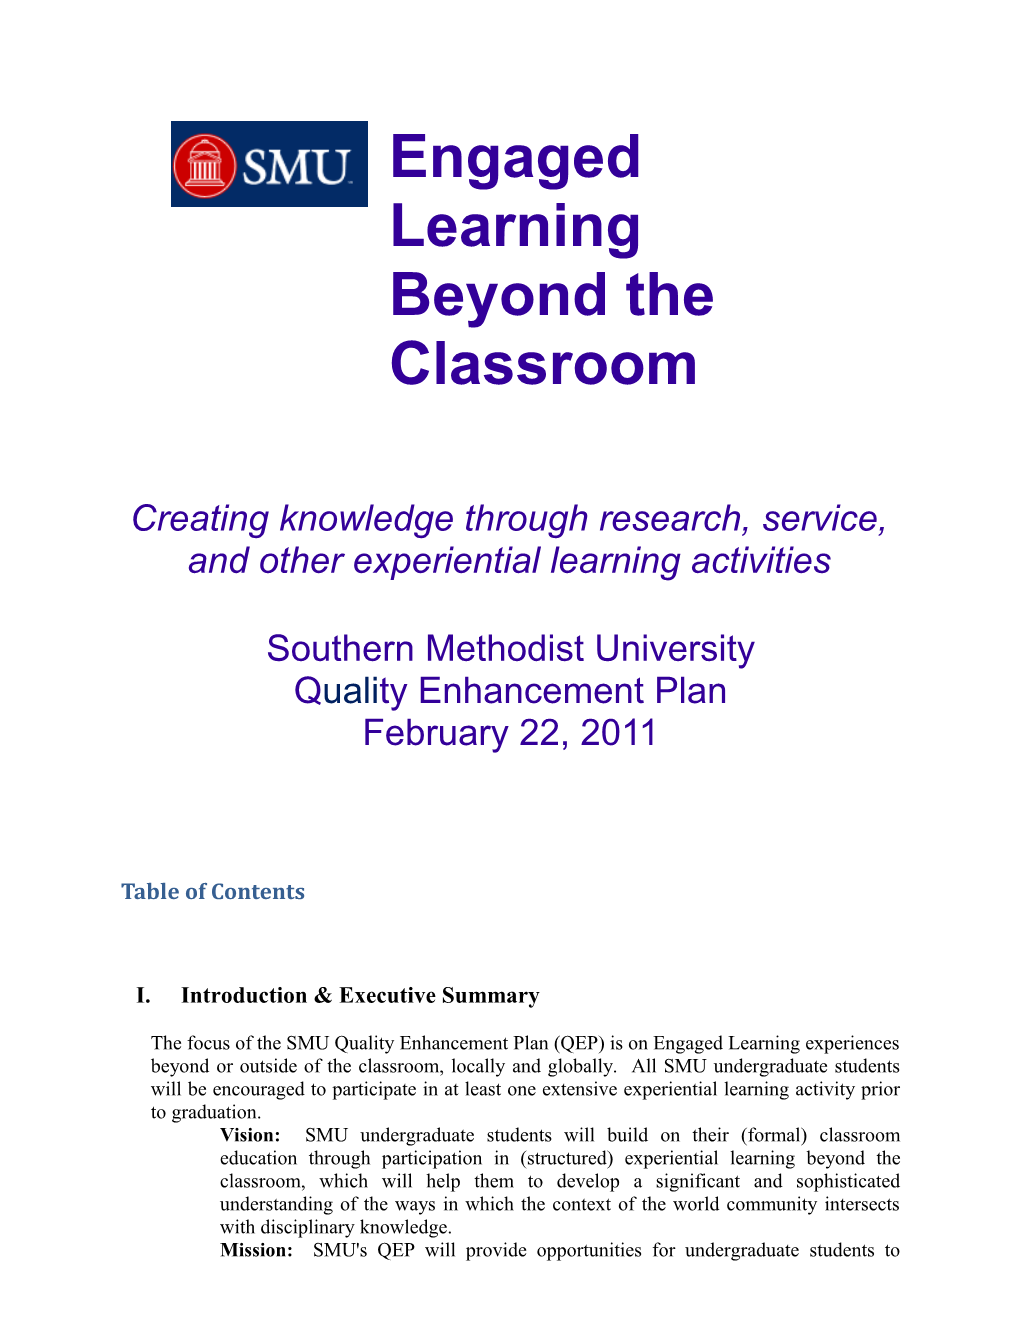 Creating Knowledge Through Research, Service, and Other Experiential Learning Activities